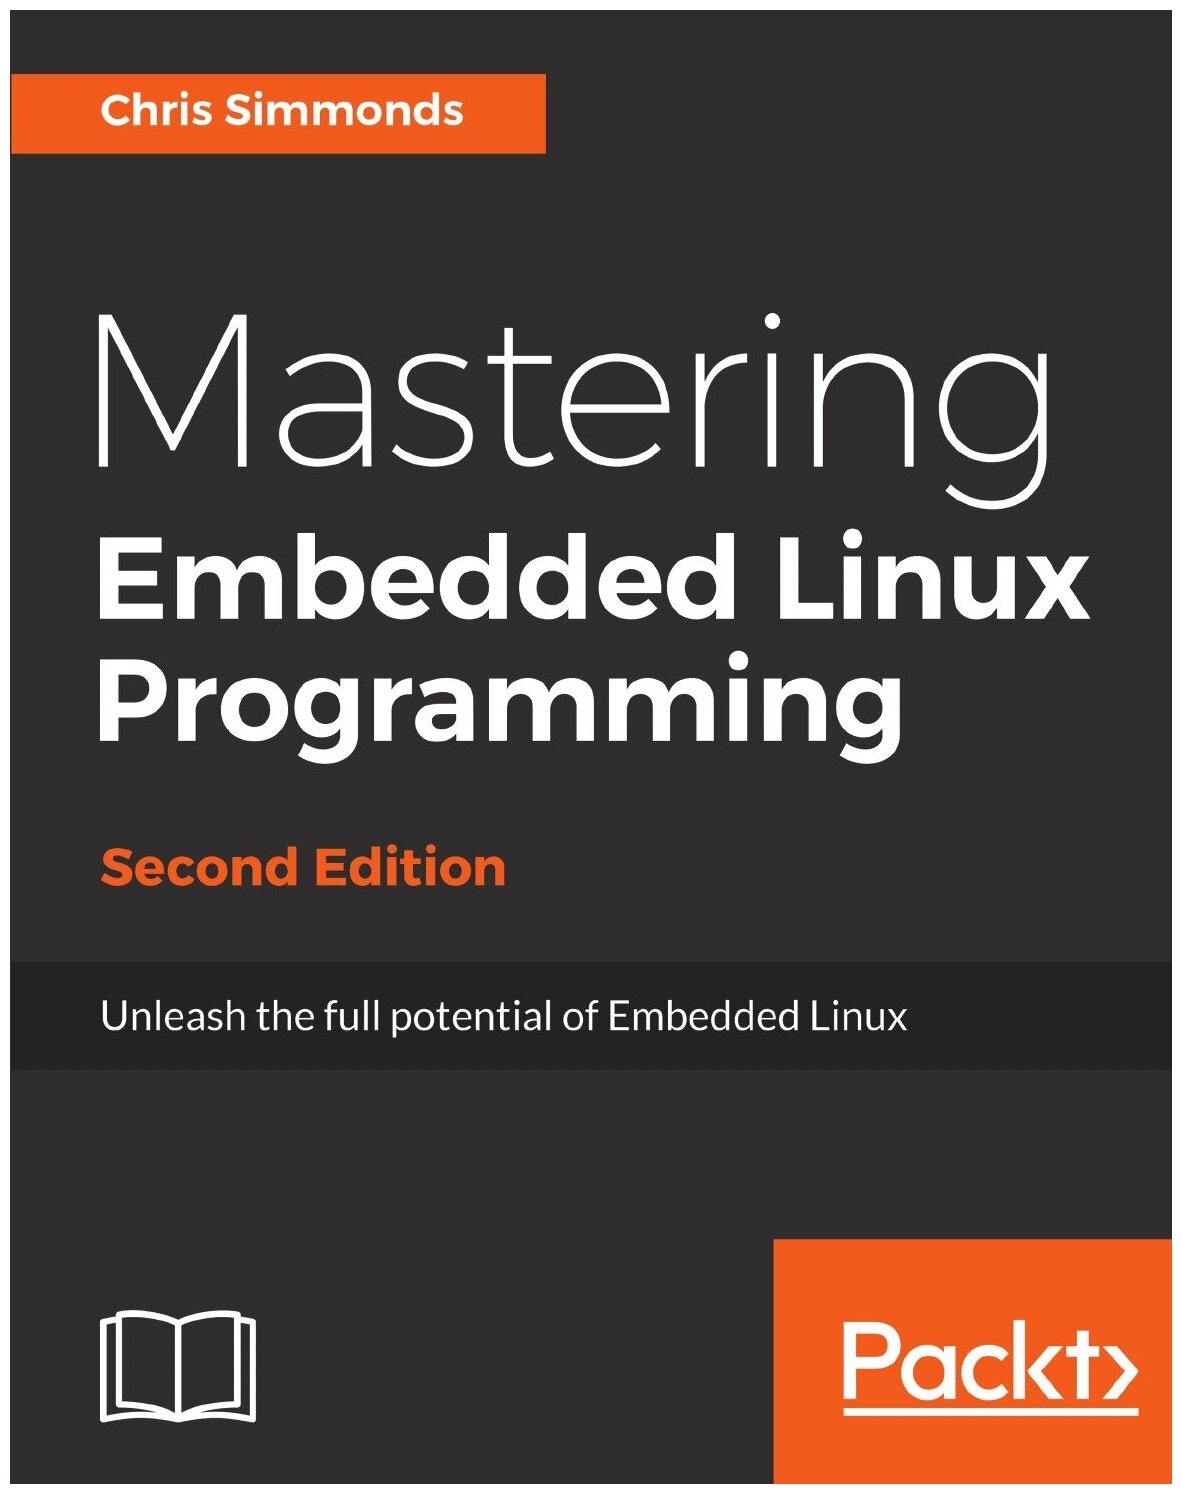 Mastering Embedded Linux Programming - Second Edition. Unleash the full potential of Embedded Linux with Linux 4.9 and Yocto Project 2.2 (Morty) Upda…